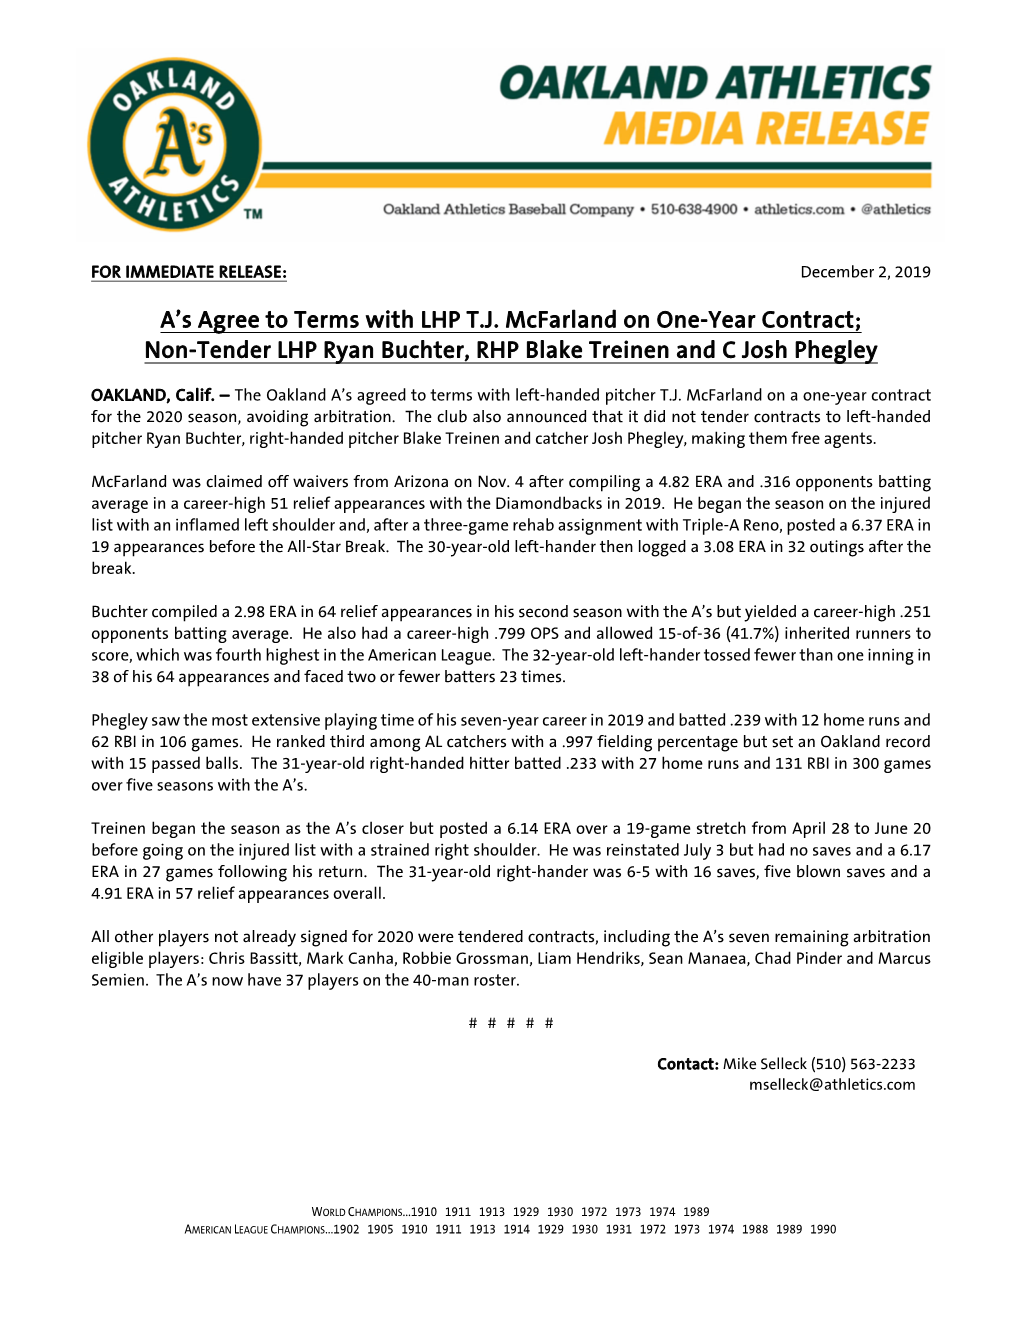 A's Agree to Terms with LHP T.J. Mcfarland on One-Year Contract